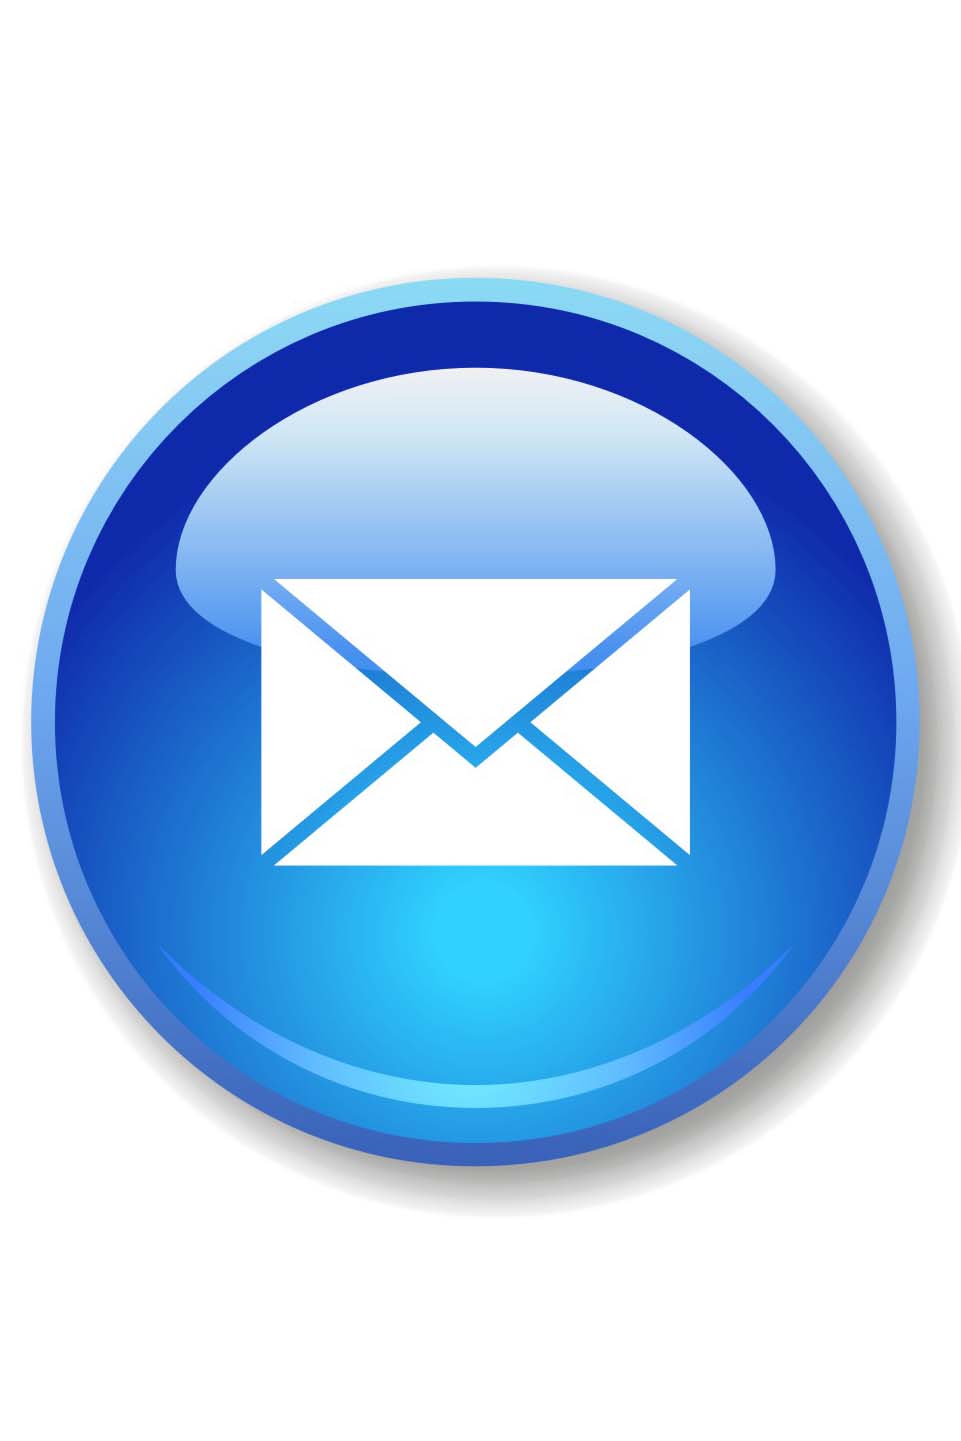 email clipart blue - photo #25